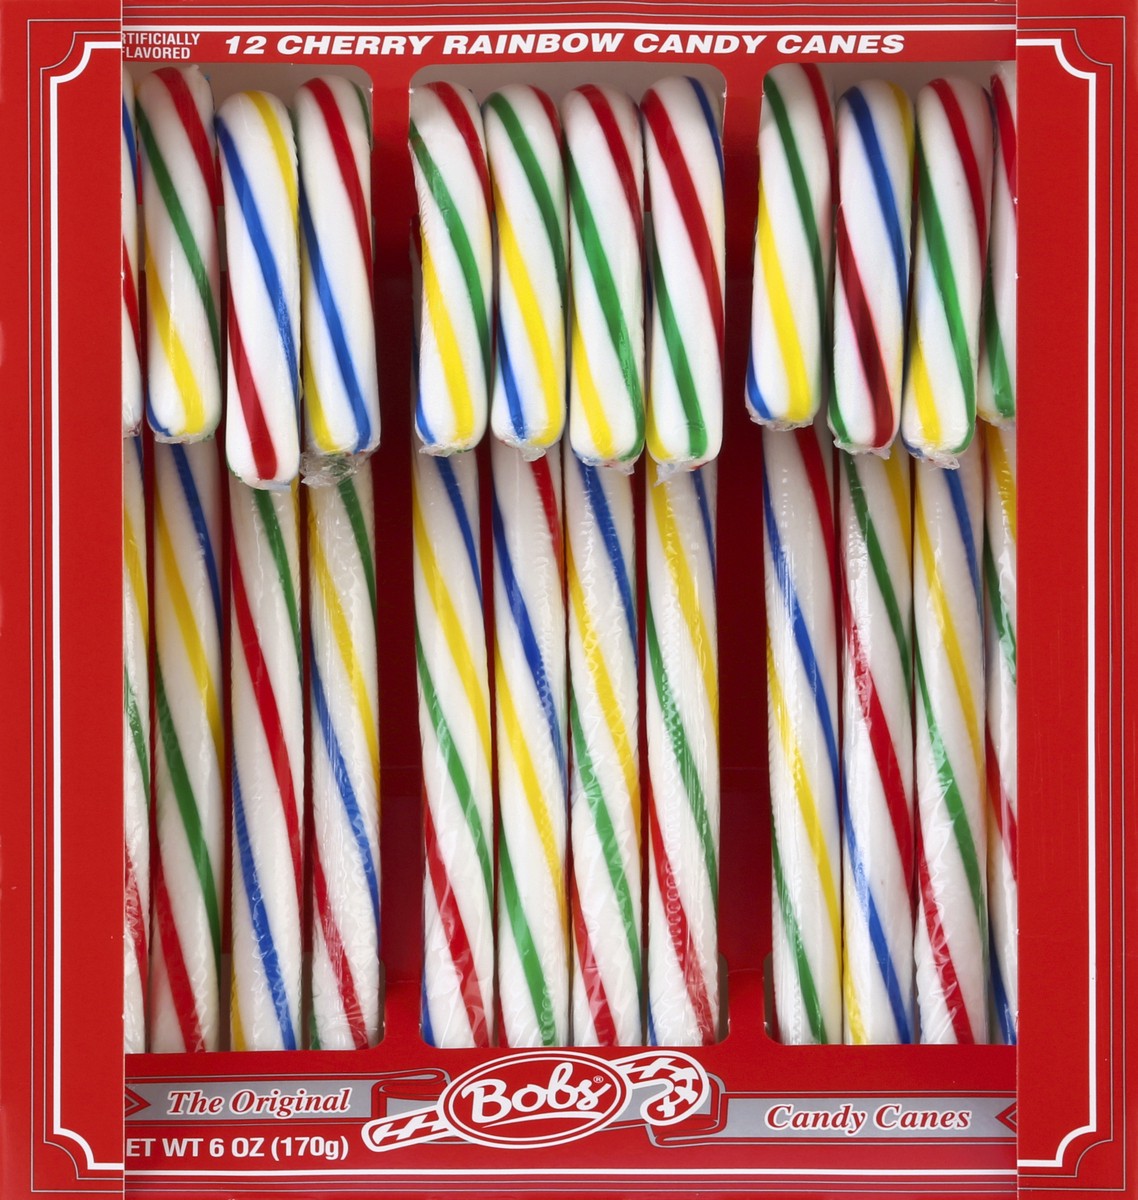 slide 4 of 4, Bobs Candy Canes, Cherry Rainbow, 12 ct